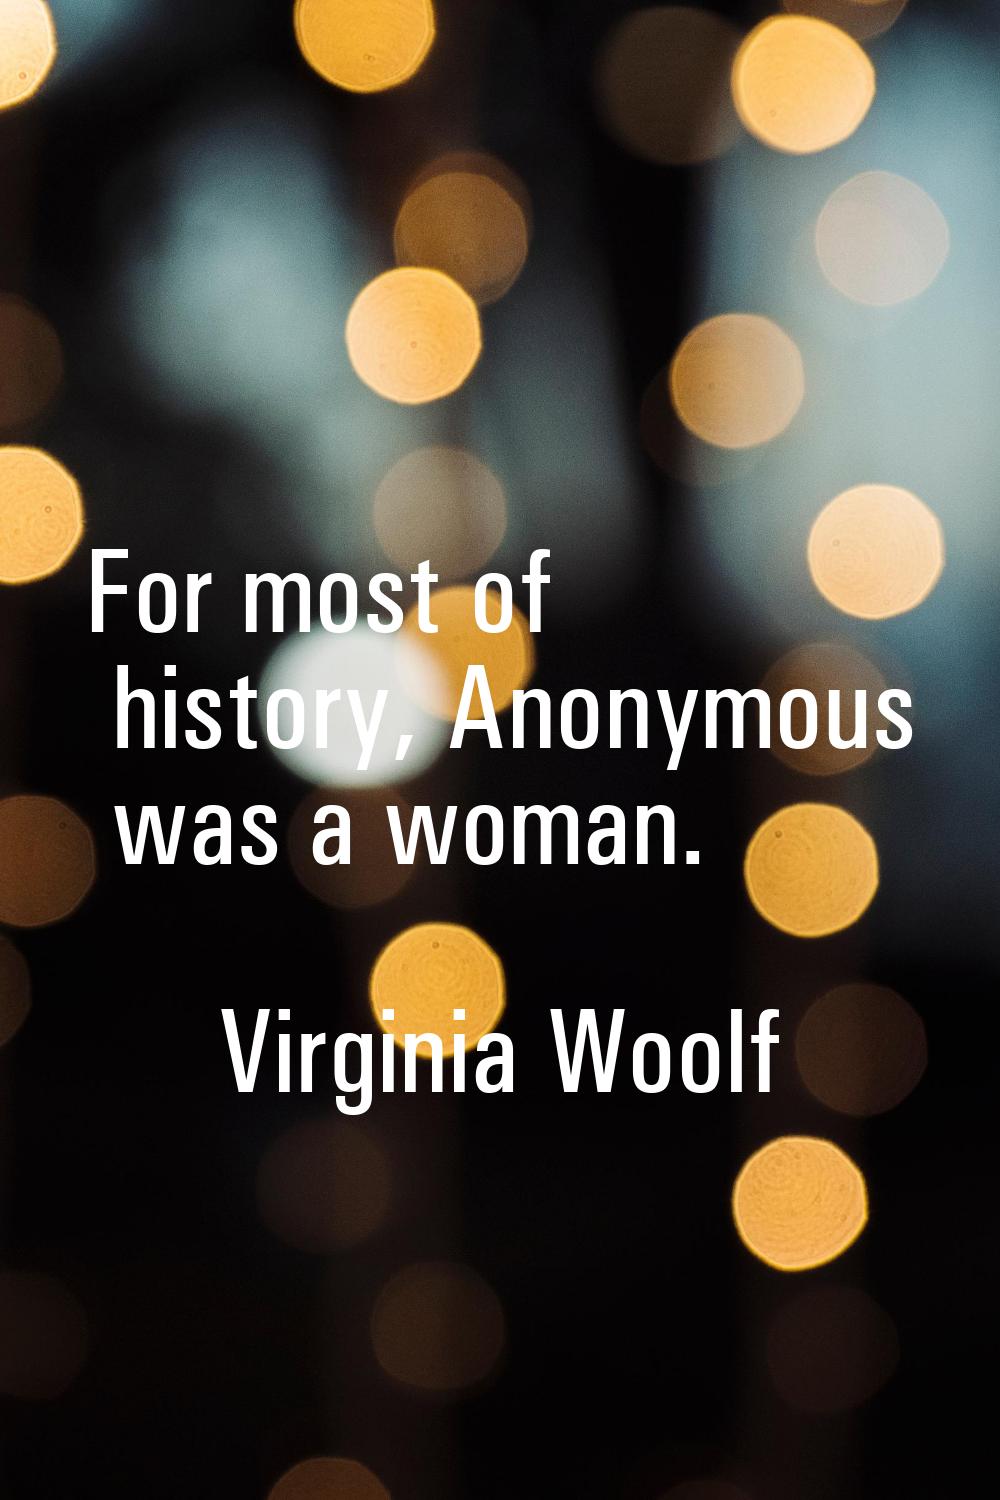 For most of history, Anonymous was a woman.